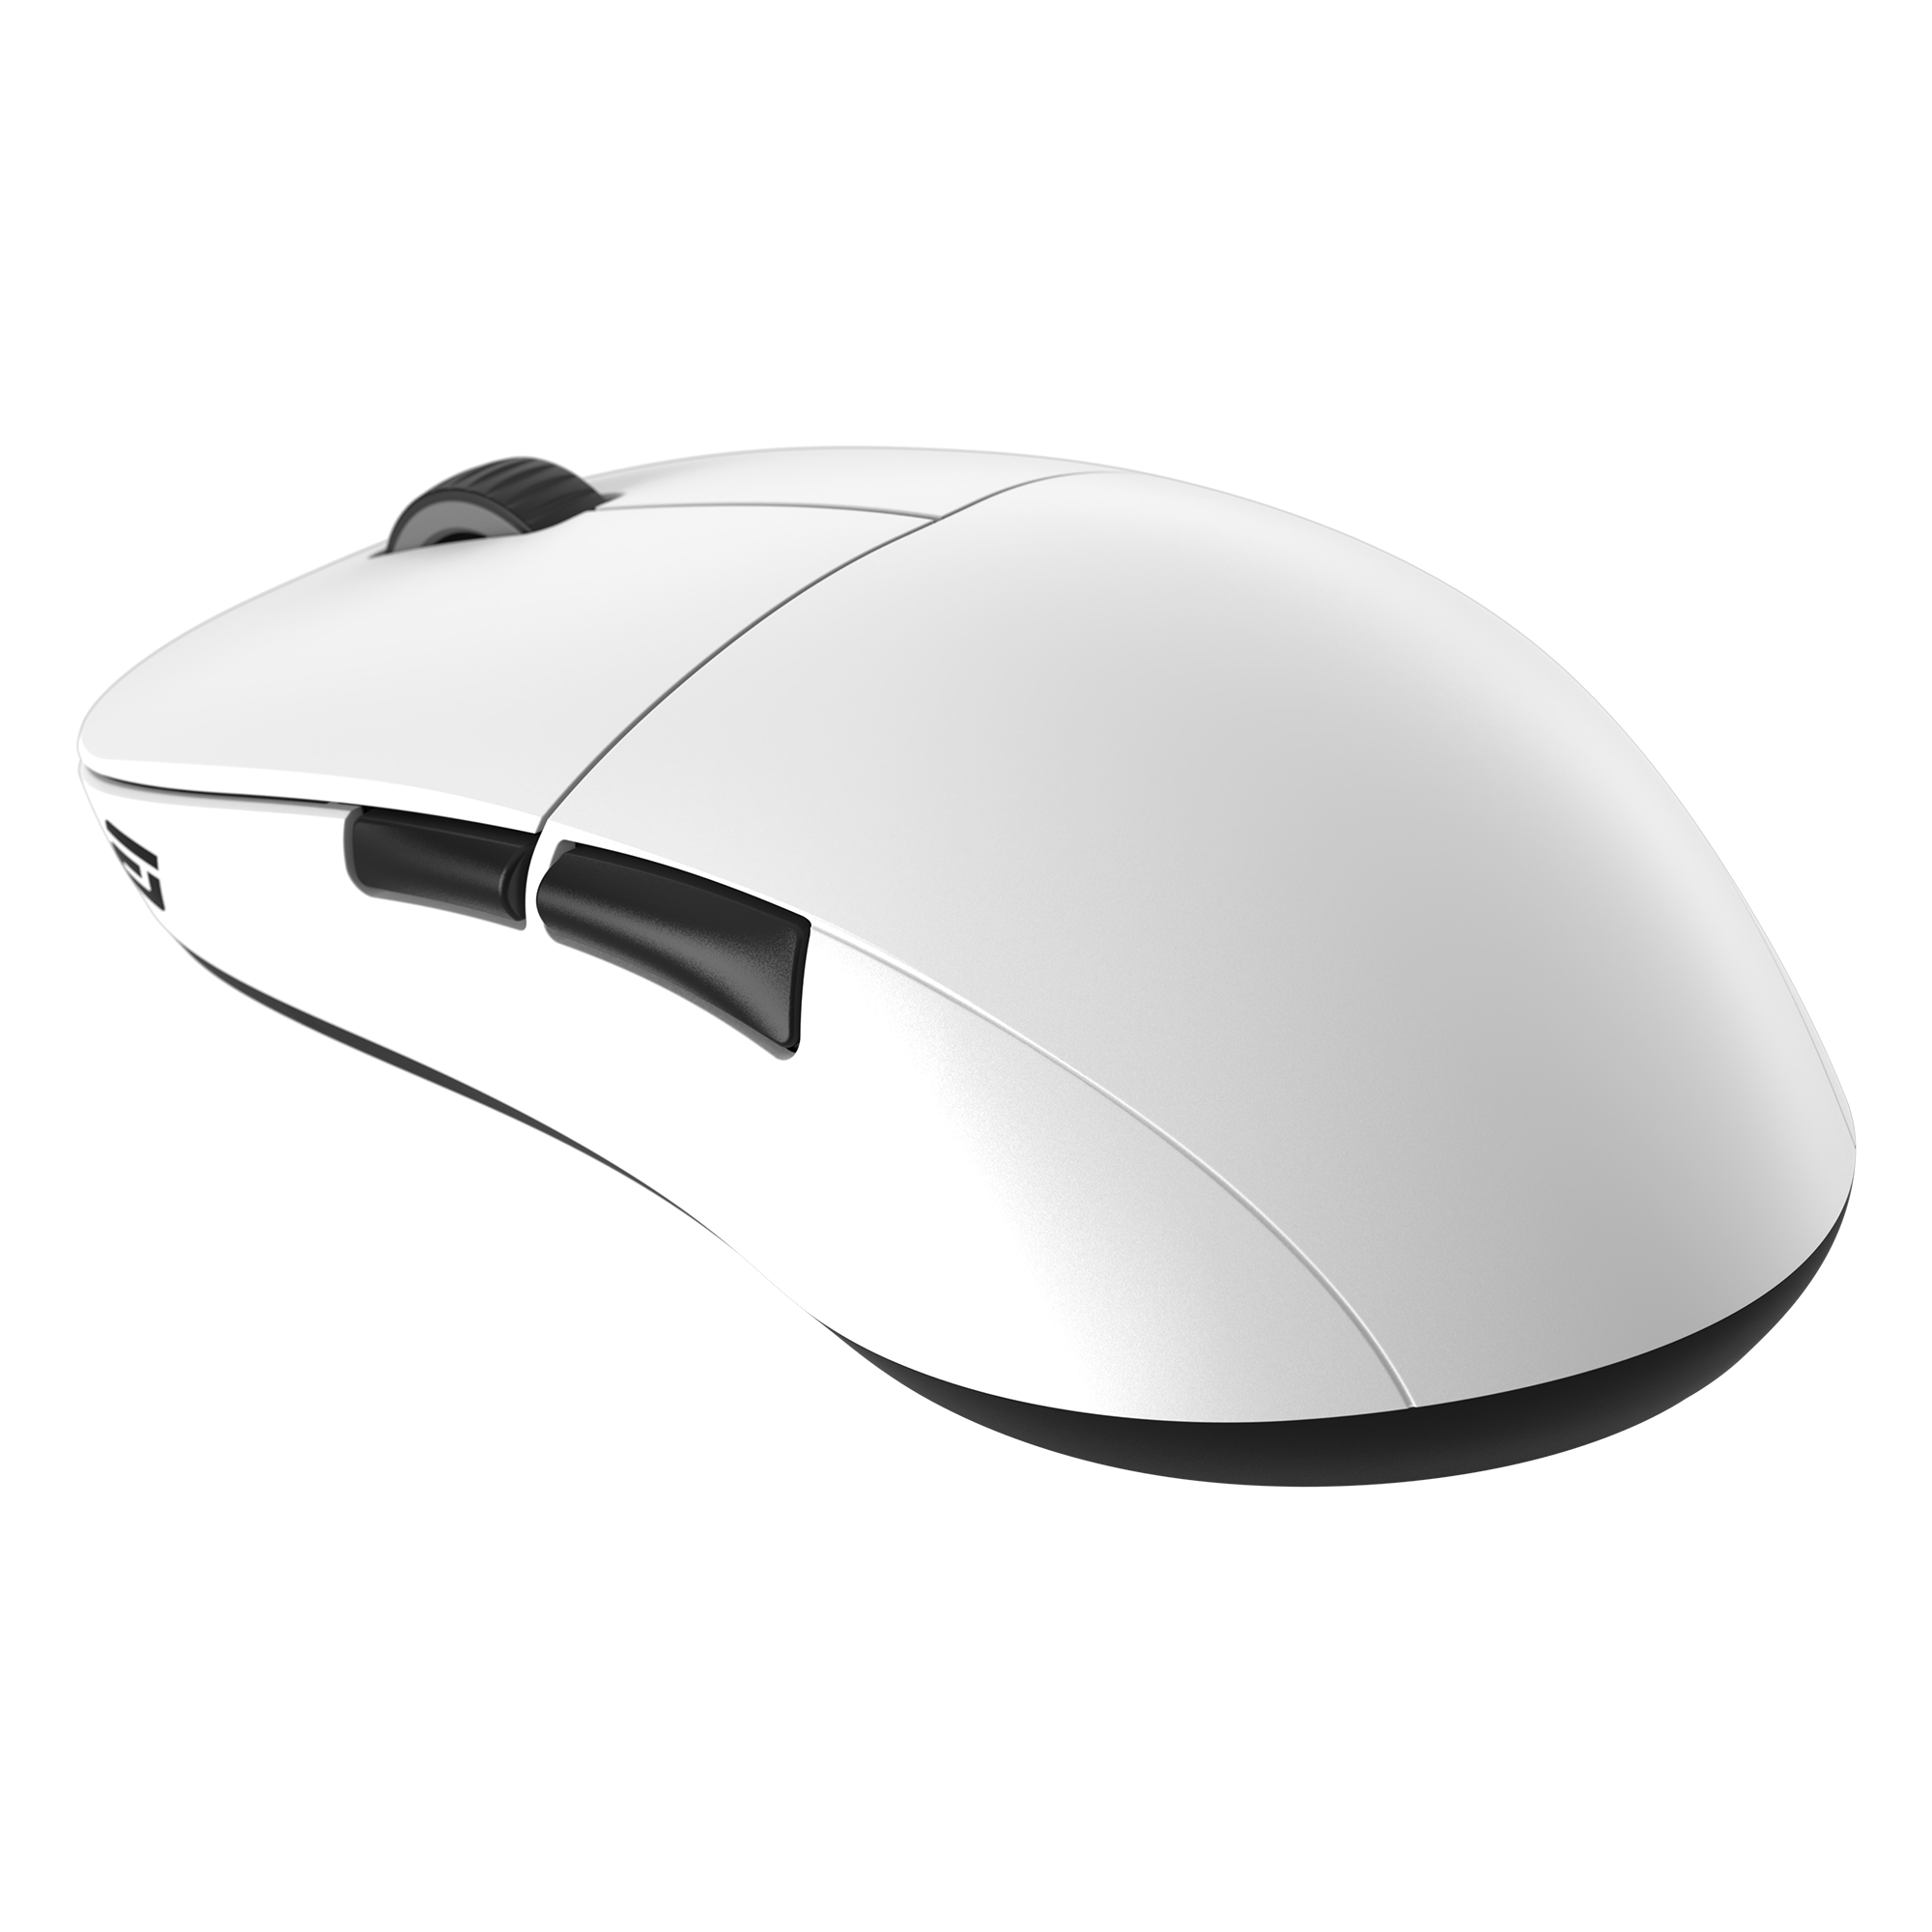 Endgame Gear XM2WE Wireless Optical Lightweight Gaming Mouse - White (EGG-XM2WE-